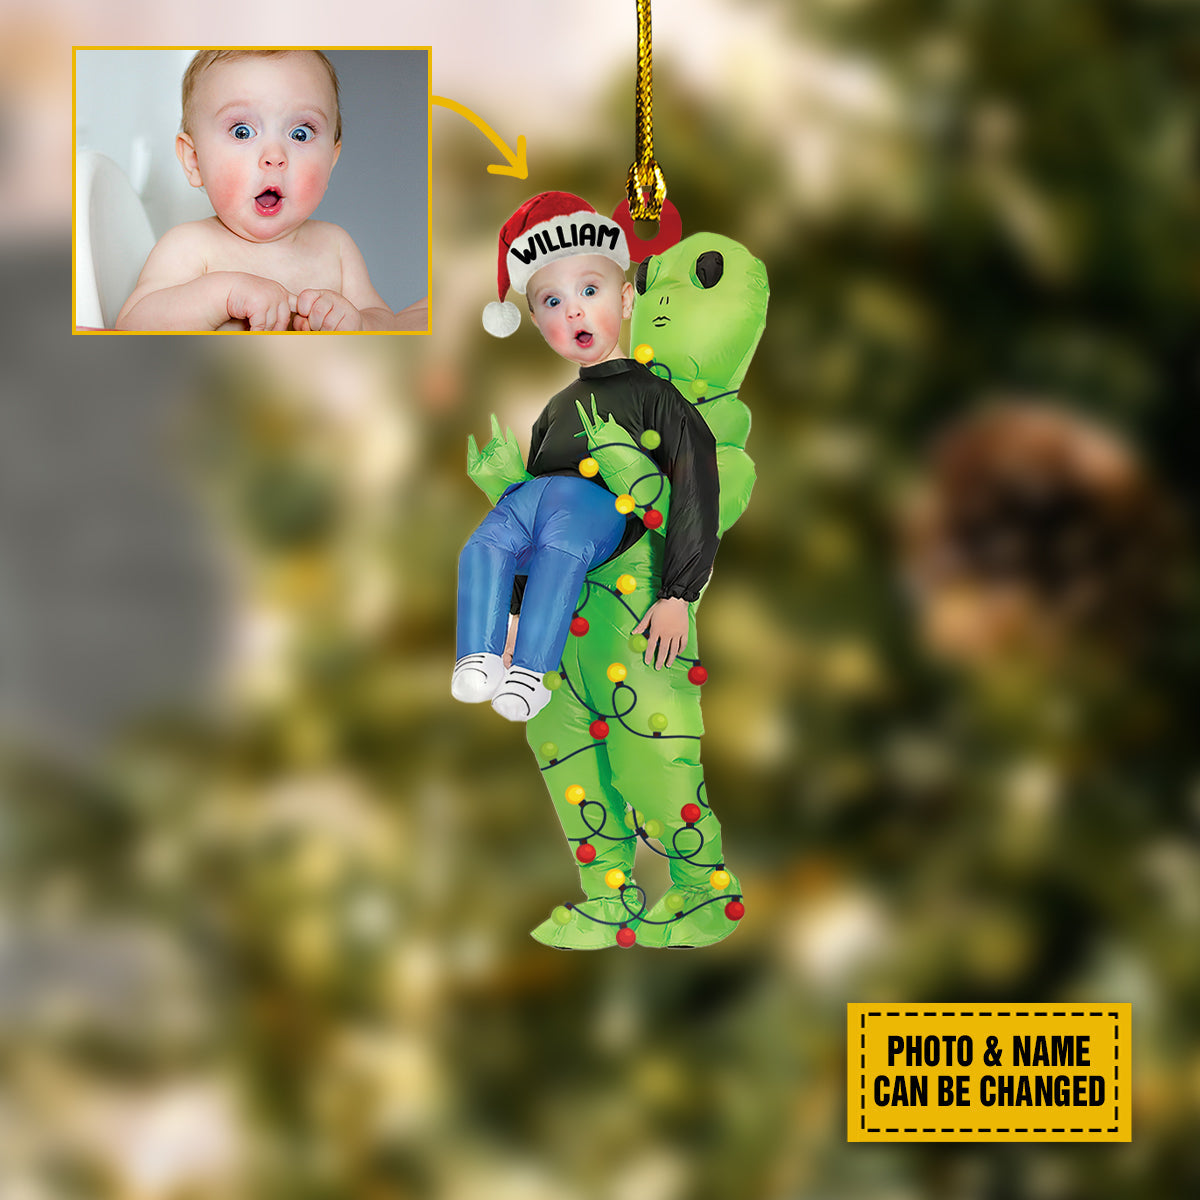 Kid And Green Alien Pick Me Up Customized Ornament/ Gift For Family/ Gift For Baby/ Holiday Decor/ Christmas Gift/ Personalize Your Photo And Name